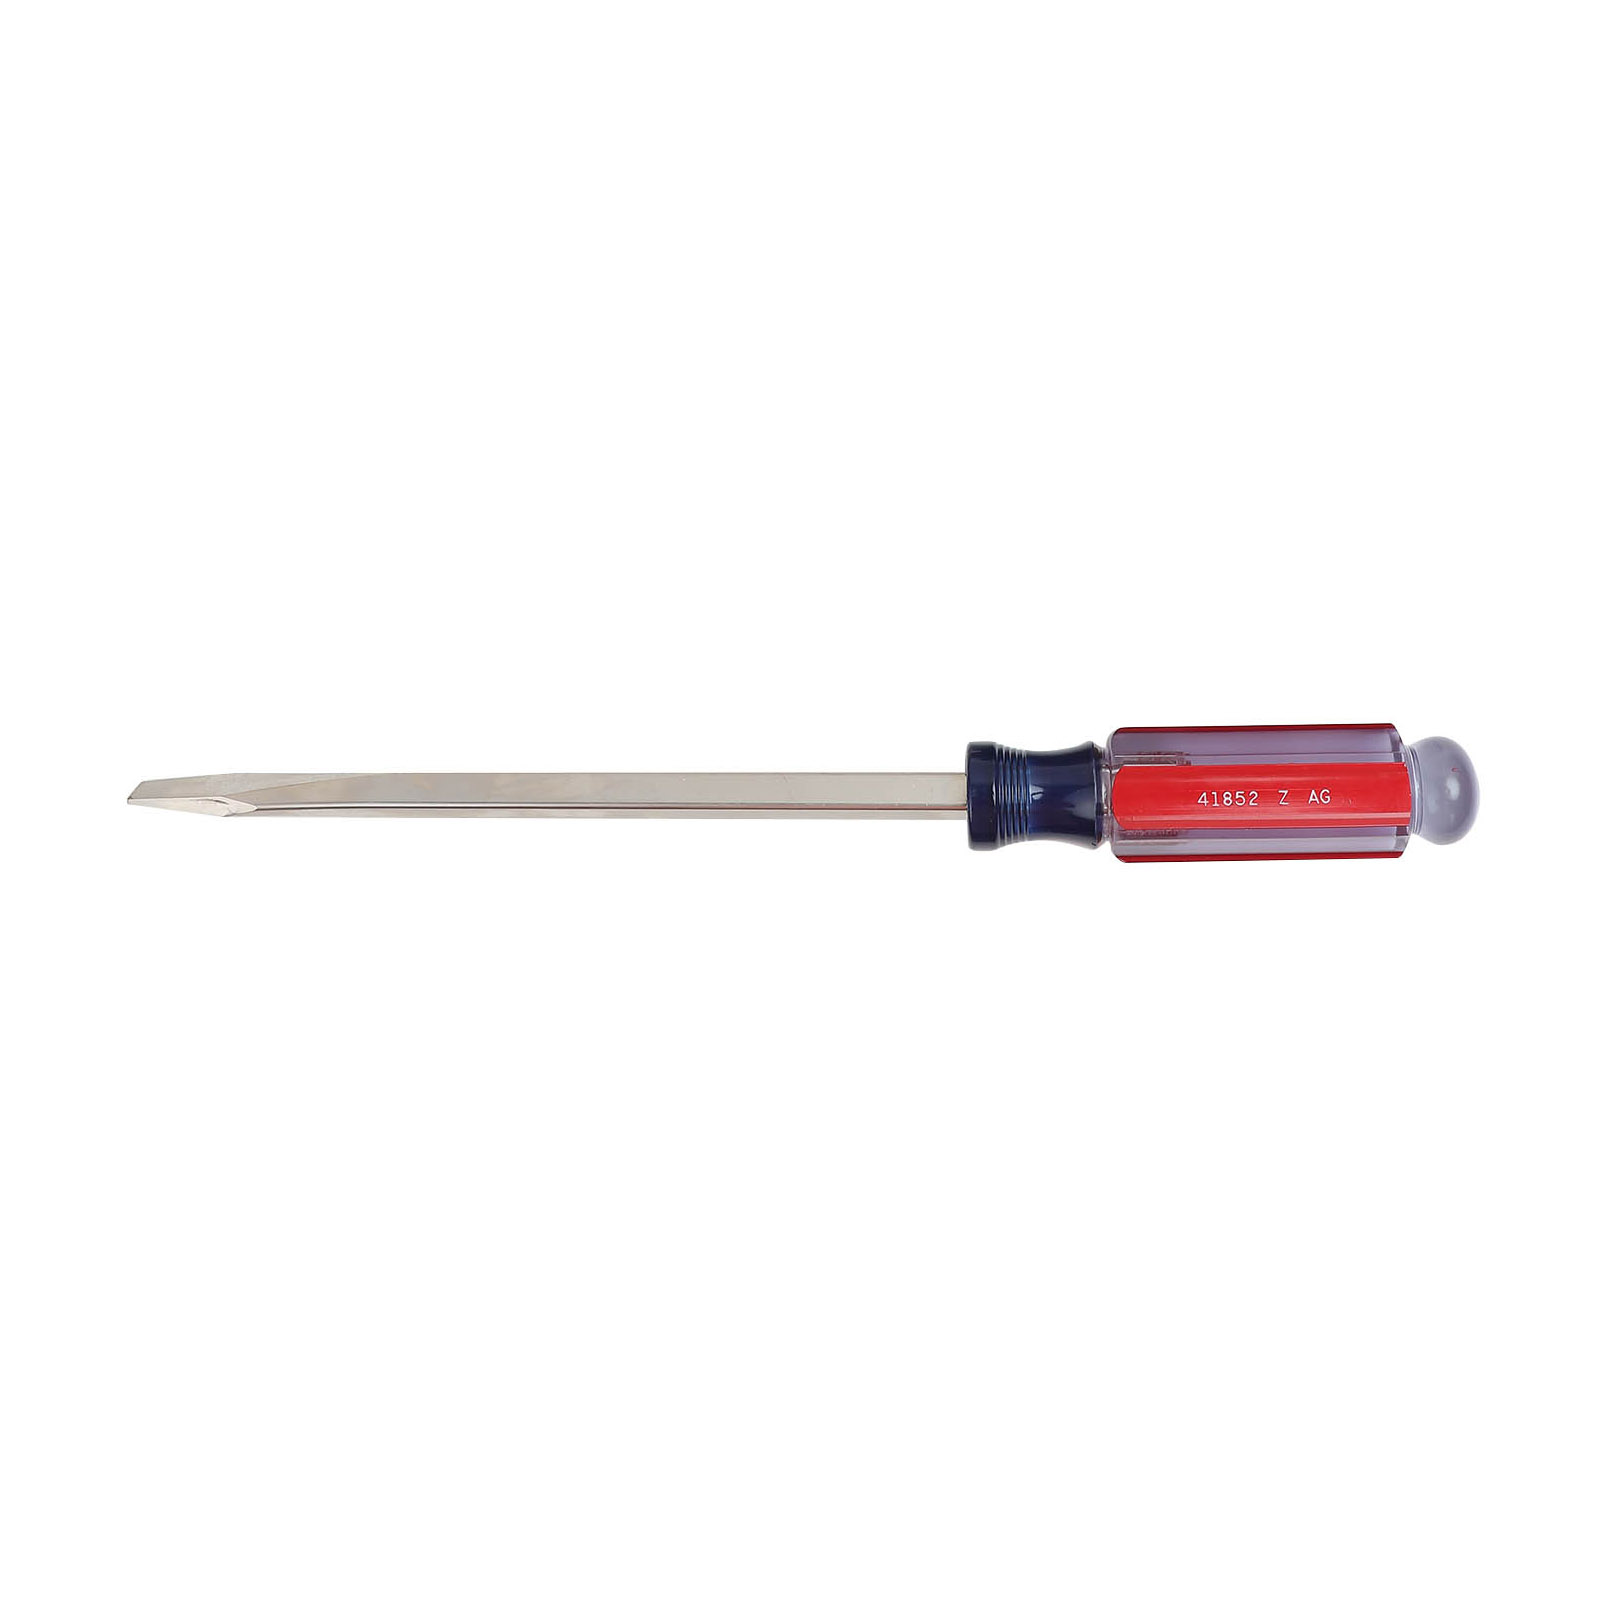 Craftsman Slotted 3/8 x 8 in Screwdriver